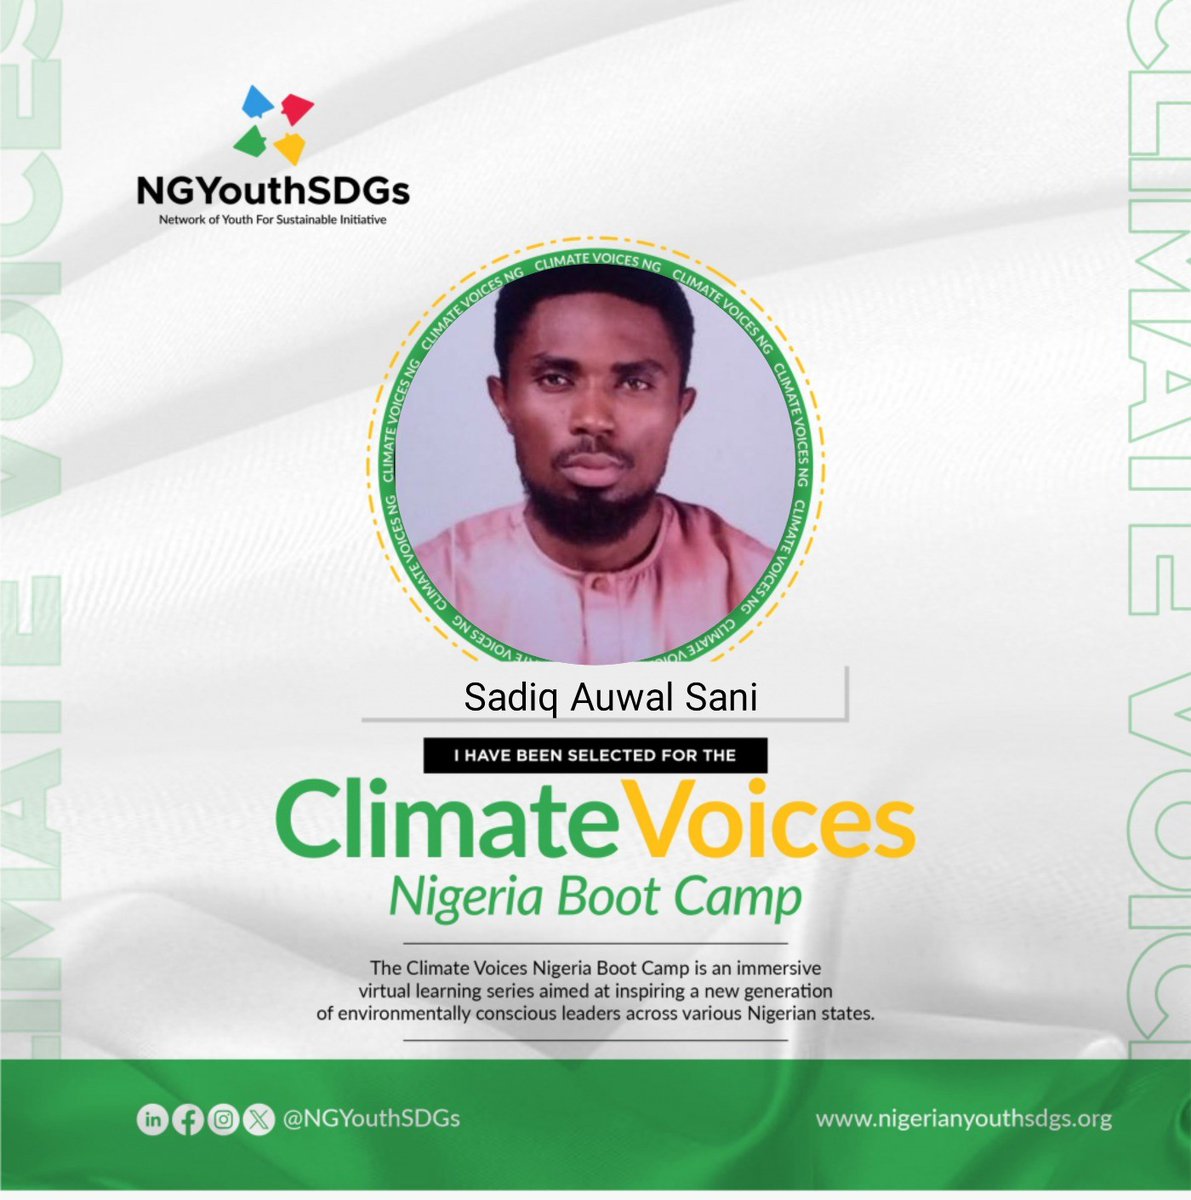 I'm thrilled to have been selected to partake in the Climate Voices Nigeria boot camp. This is an incredible opportunity to learn from experts, connect with fellow advocates, and grow my skills in climate change activism. @NGYouthSDGs  
#ClimatevoicesNG